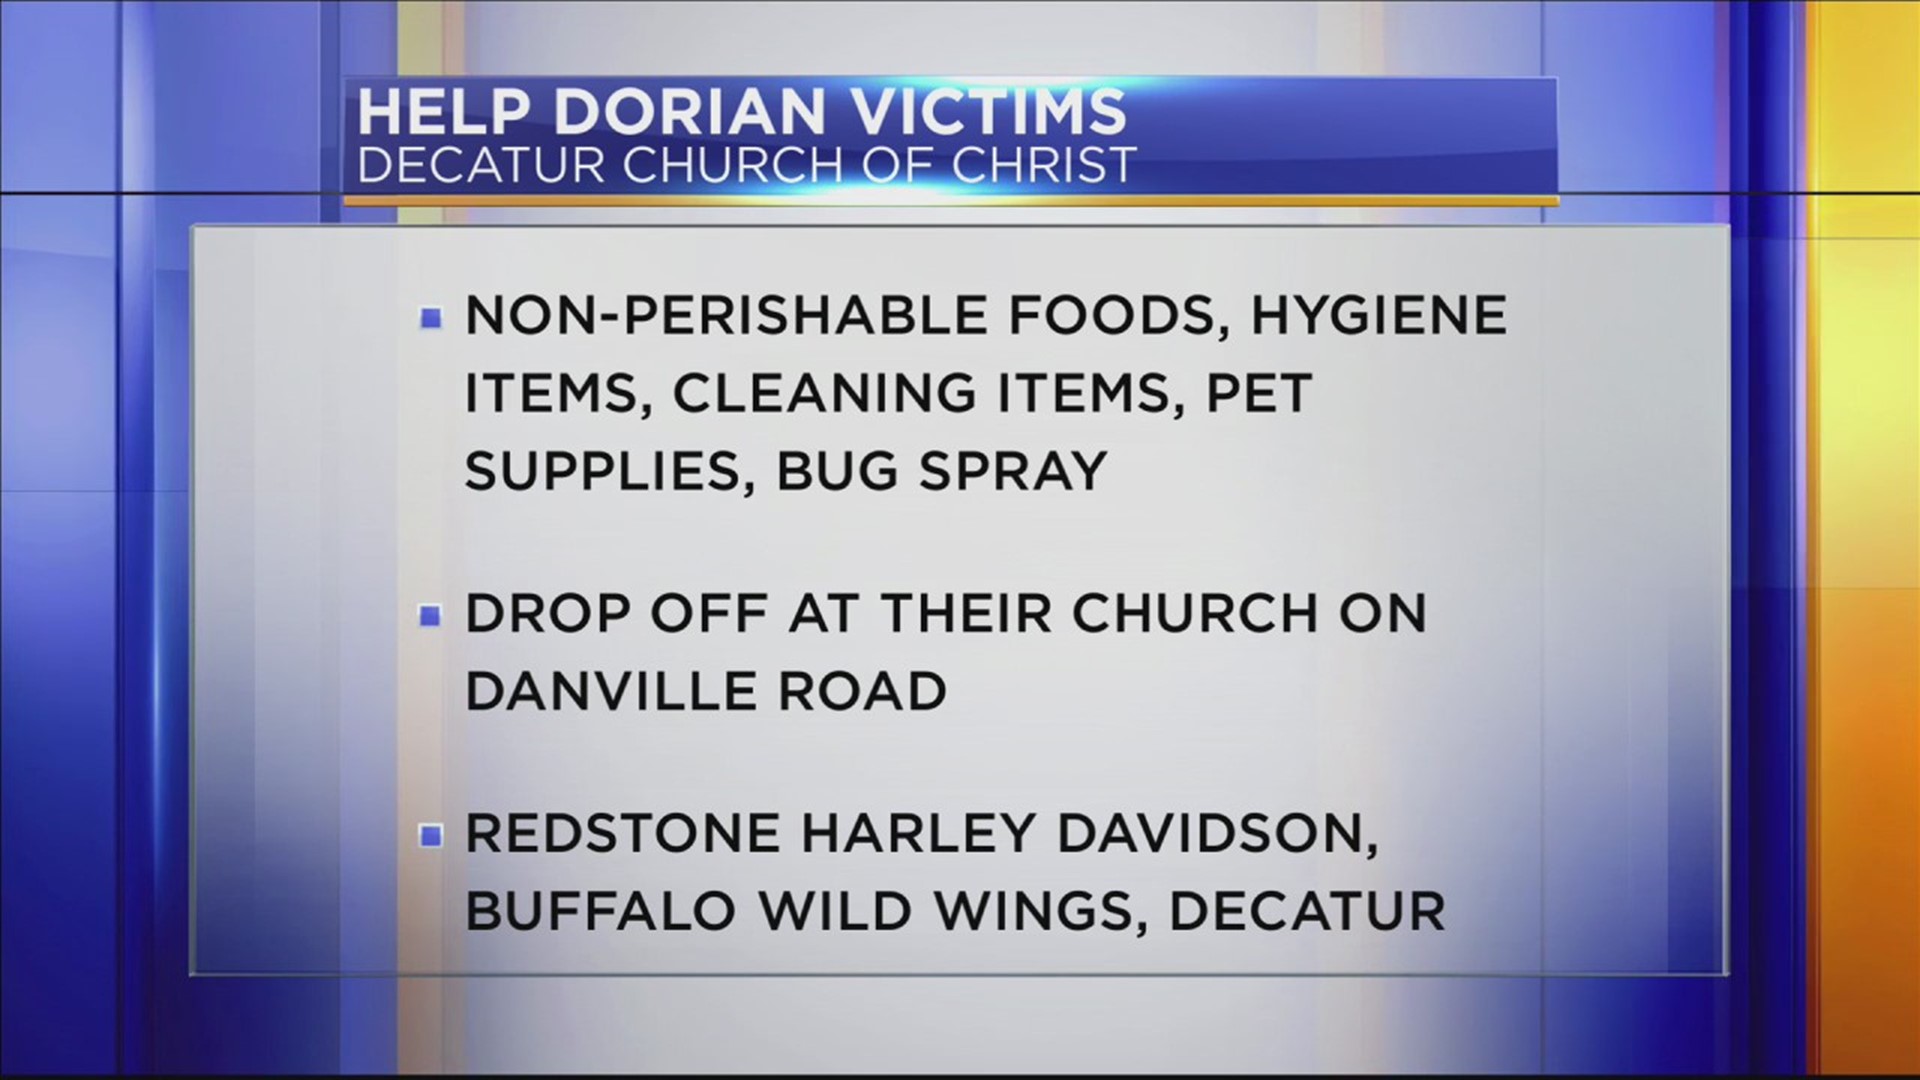 As the post-Hurricane Dorian cleanup continues, the Decatur Church of Christ is gathering donations to help those impacted.